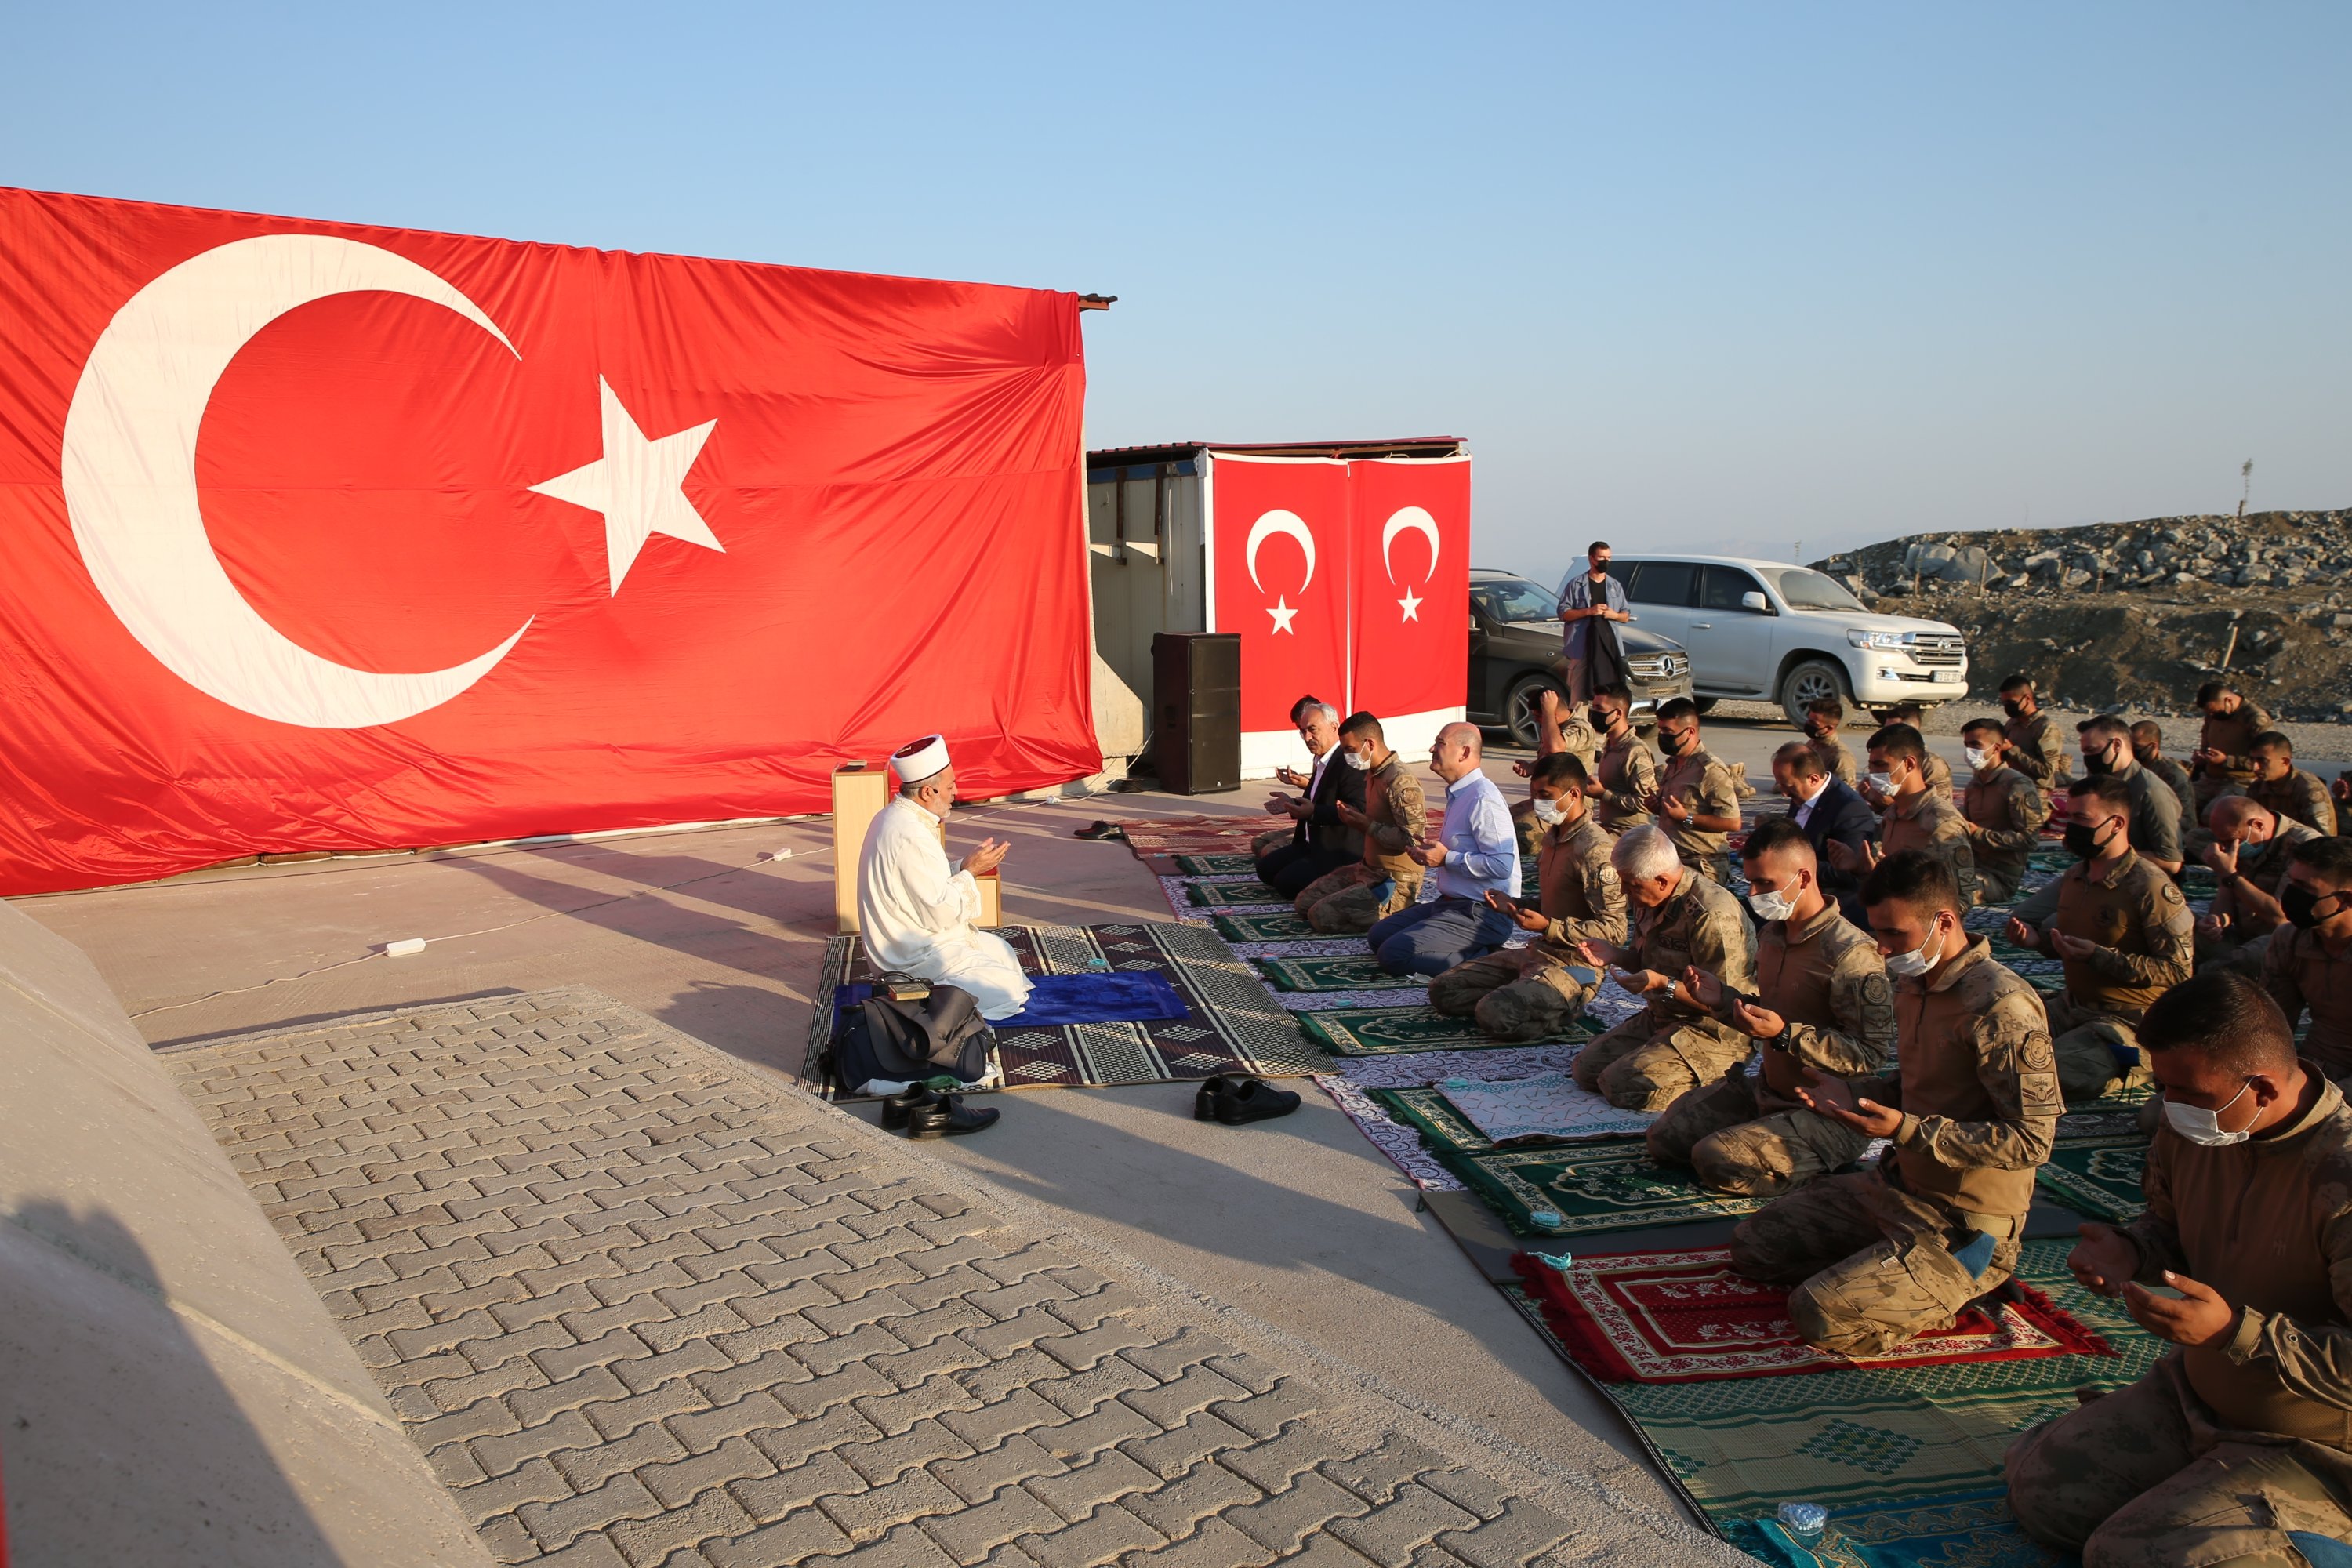 Interior Minister Süleyman Soylu (1st row, 3rd from top) perform bayram prayers during the first day of Qurban Bayram, or Eid al-Adha, at a gendarmerie command post in Şırnak, Turkey, July 20, 2021. (AA Photo)